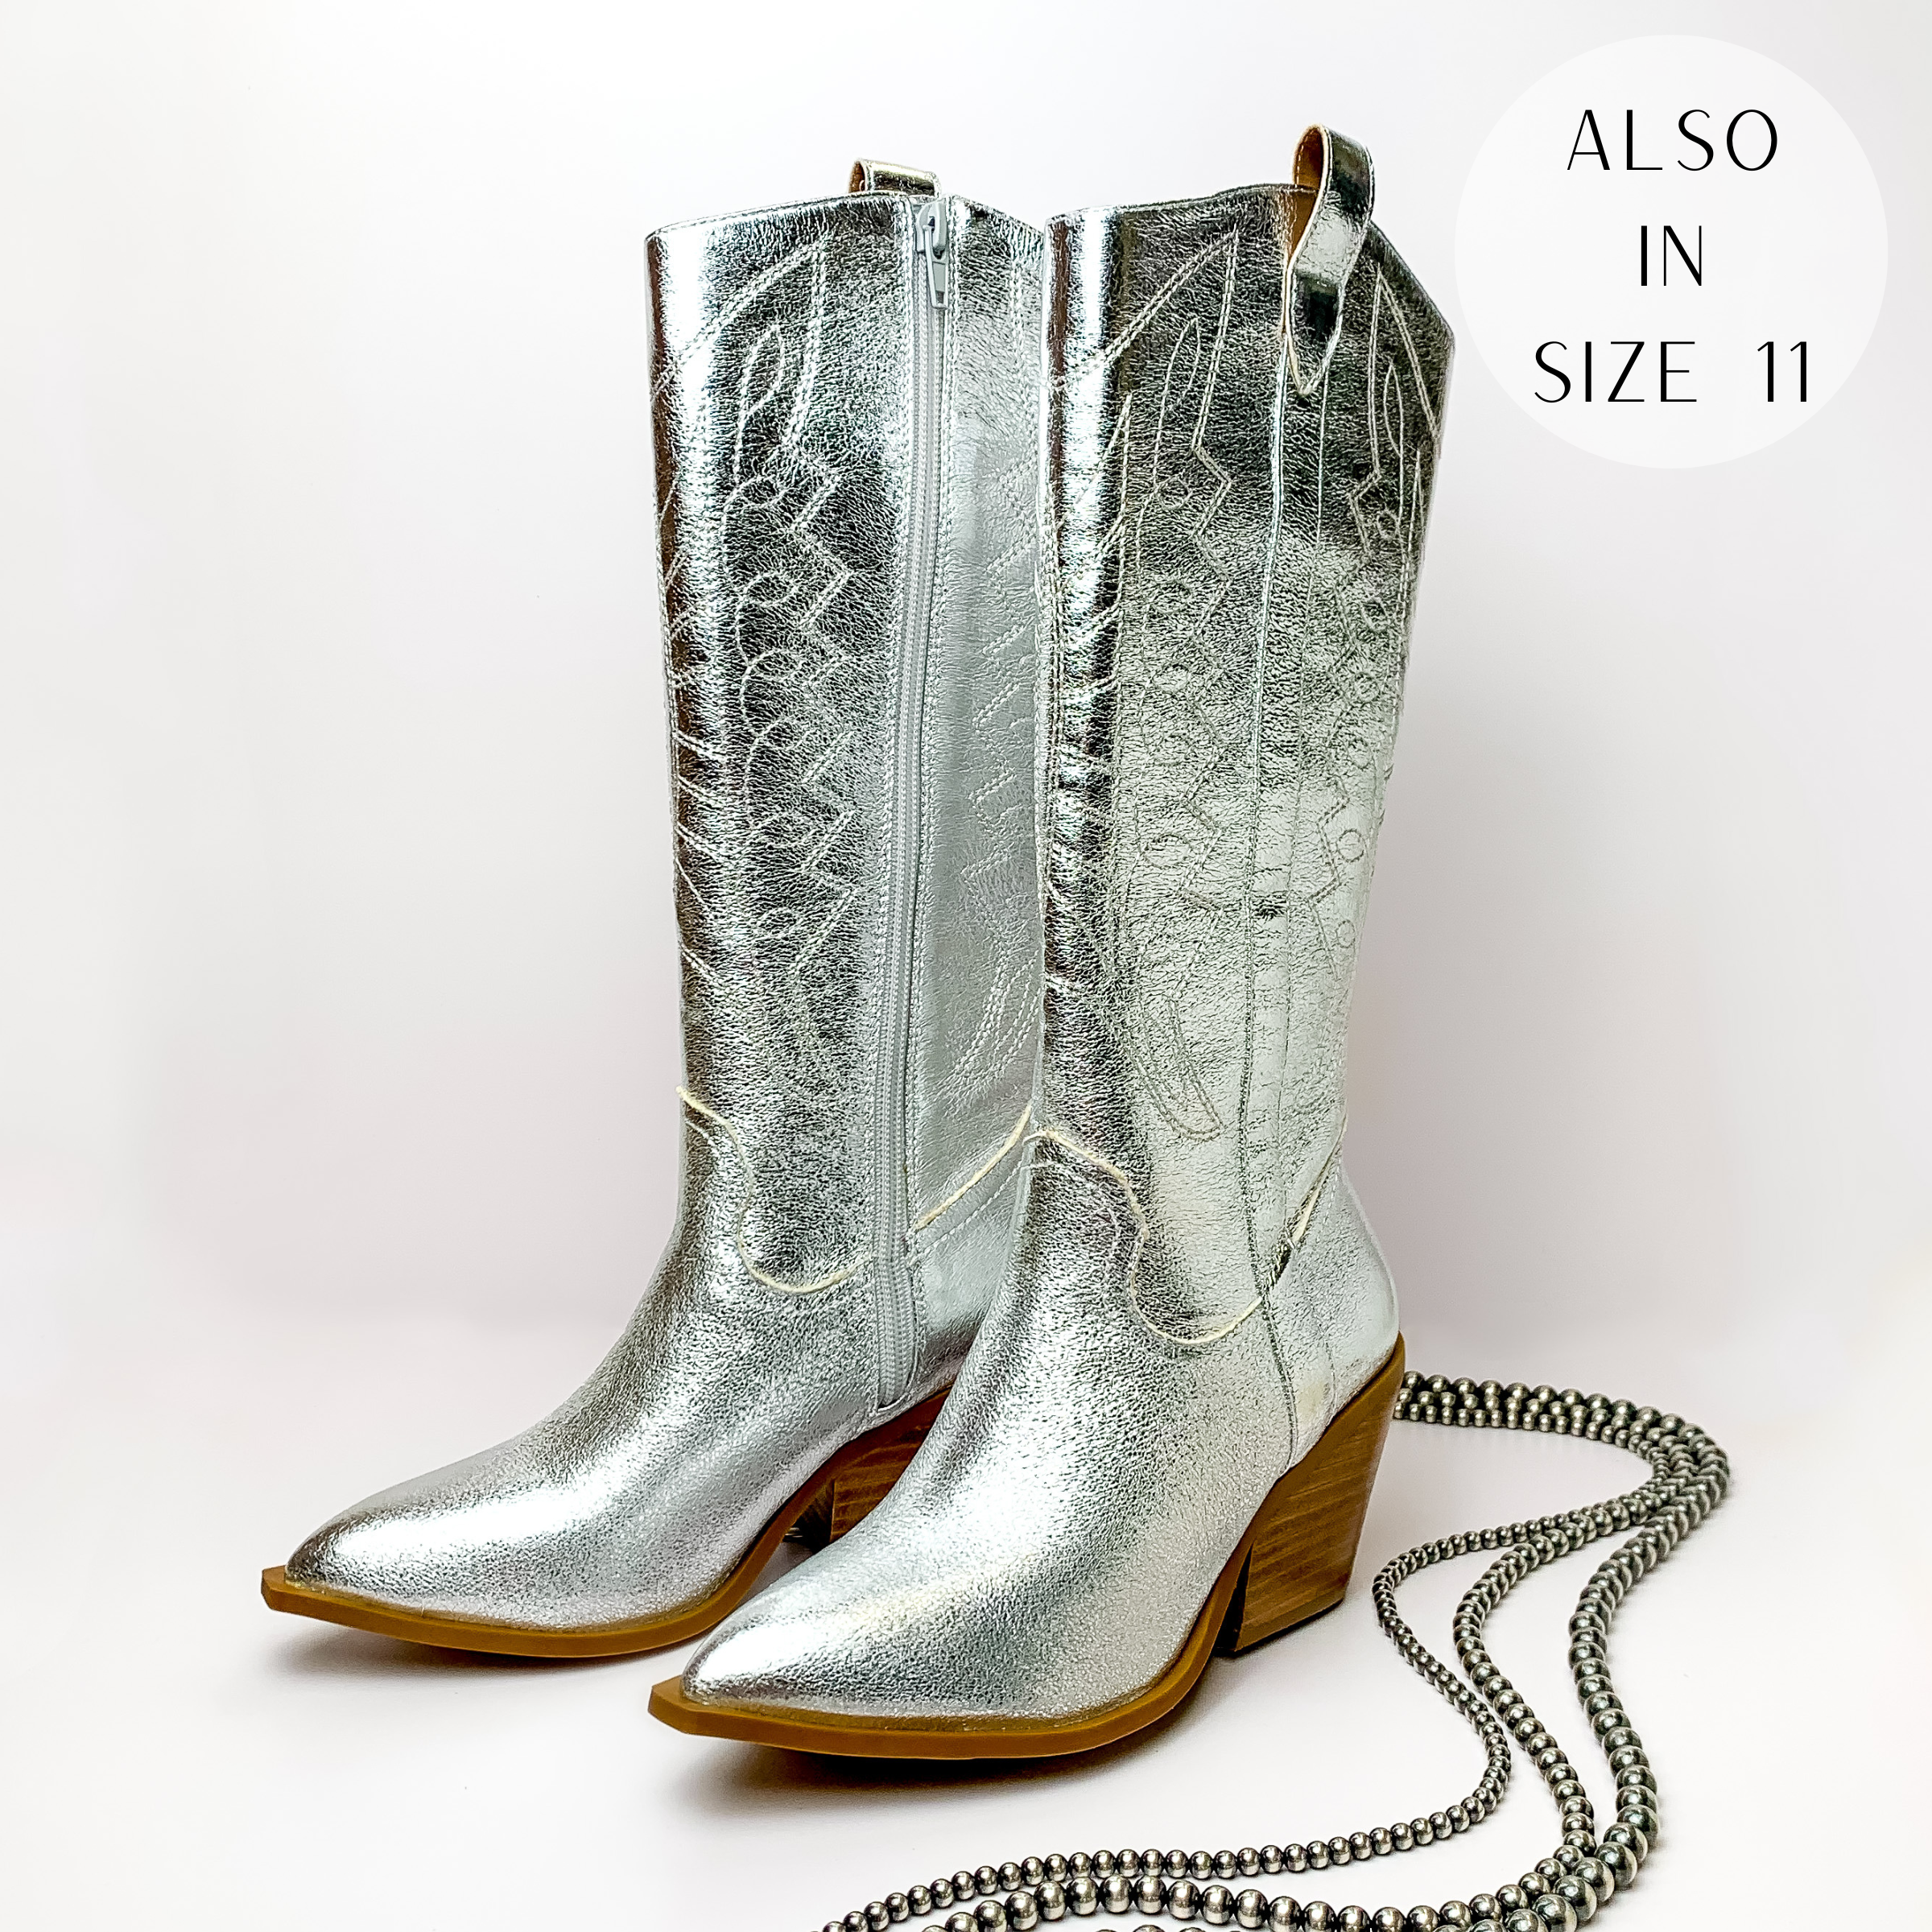 Metallic silver cowboy boots with silver western stitching and tan heel. These boots are pictured on a white background with silver beads on the right side of the boots.